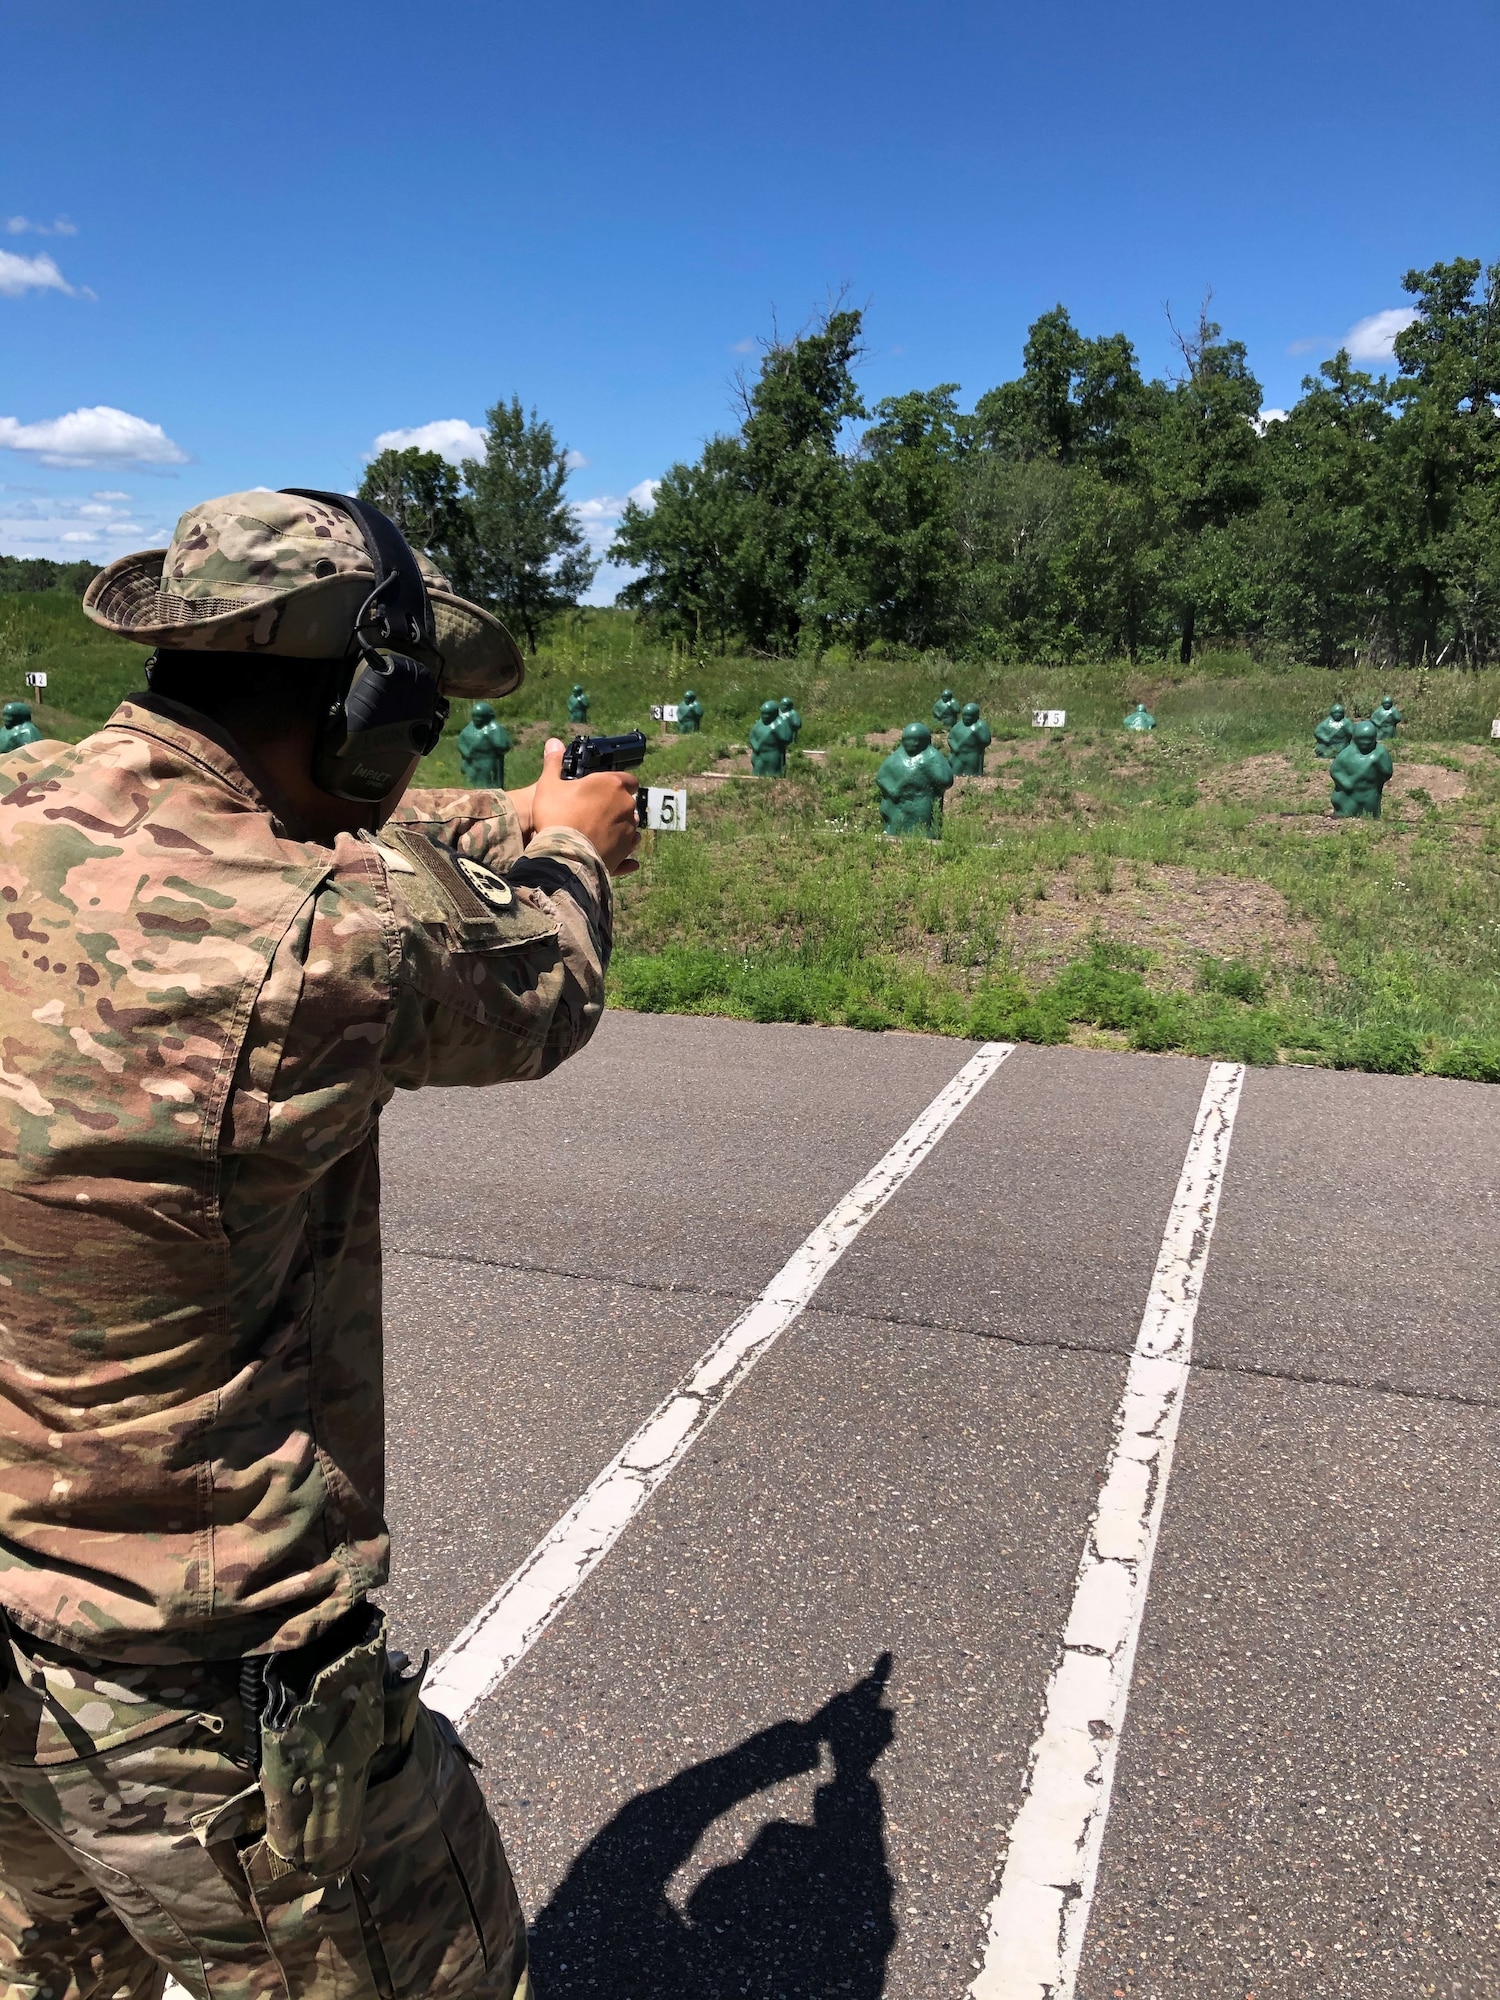 An Air National Guard Explosive Ordnance Disposal technician participates in a field training exercise at Camp Ripley Training Center, Minnesota, July 20-24, 2020.